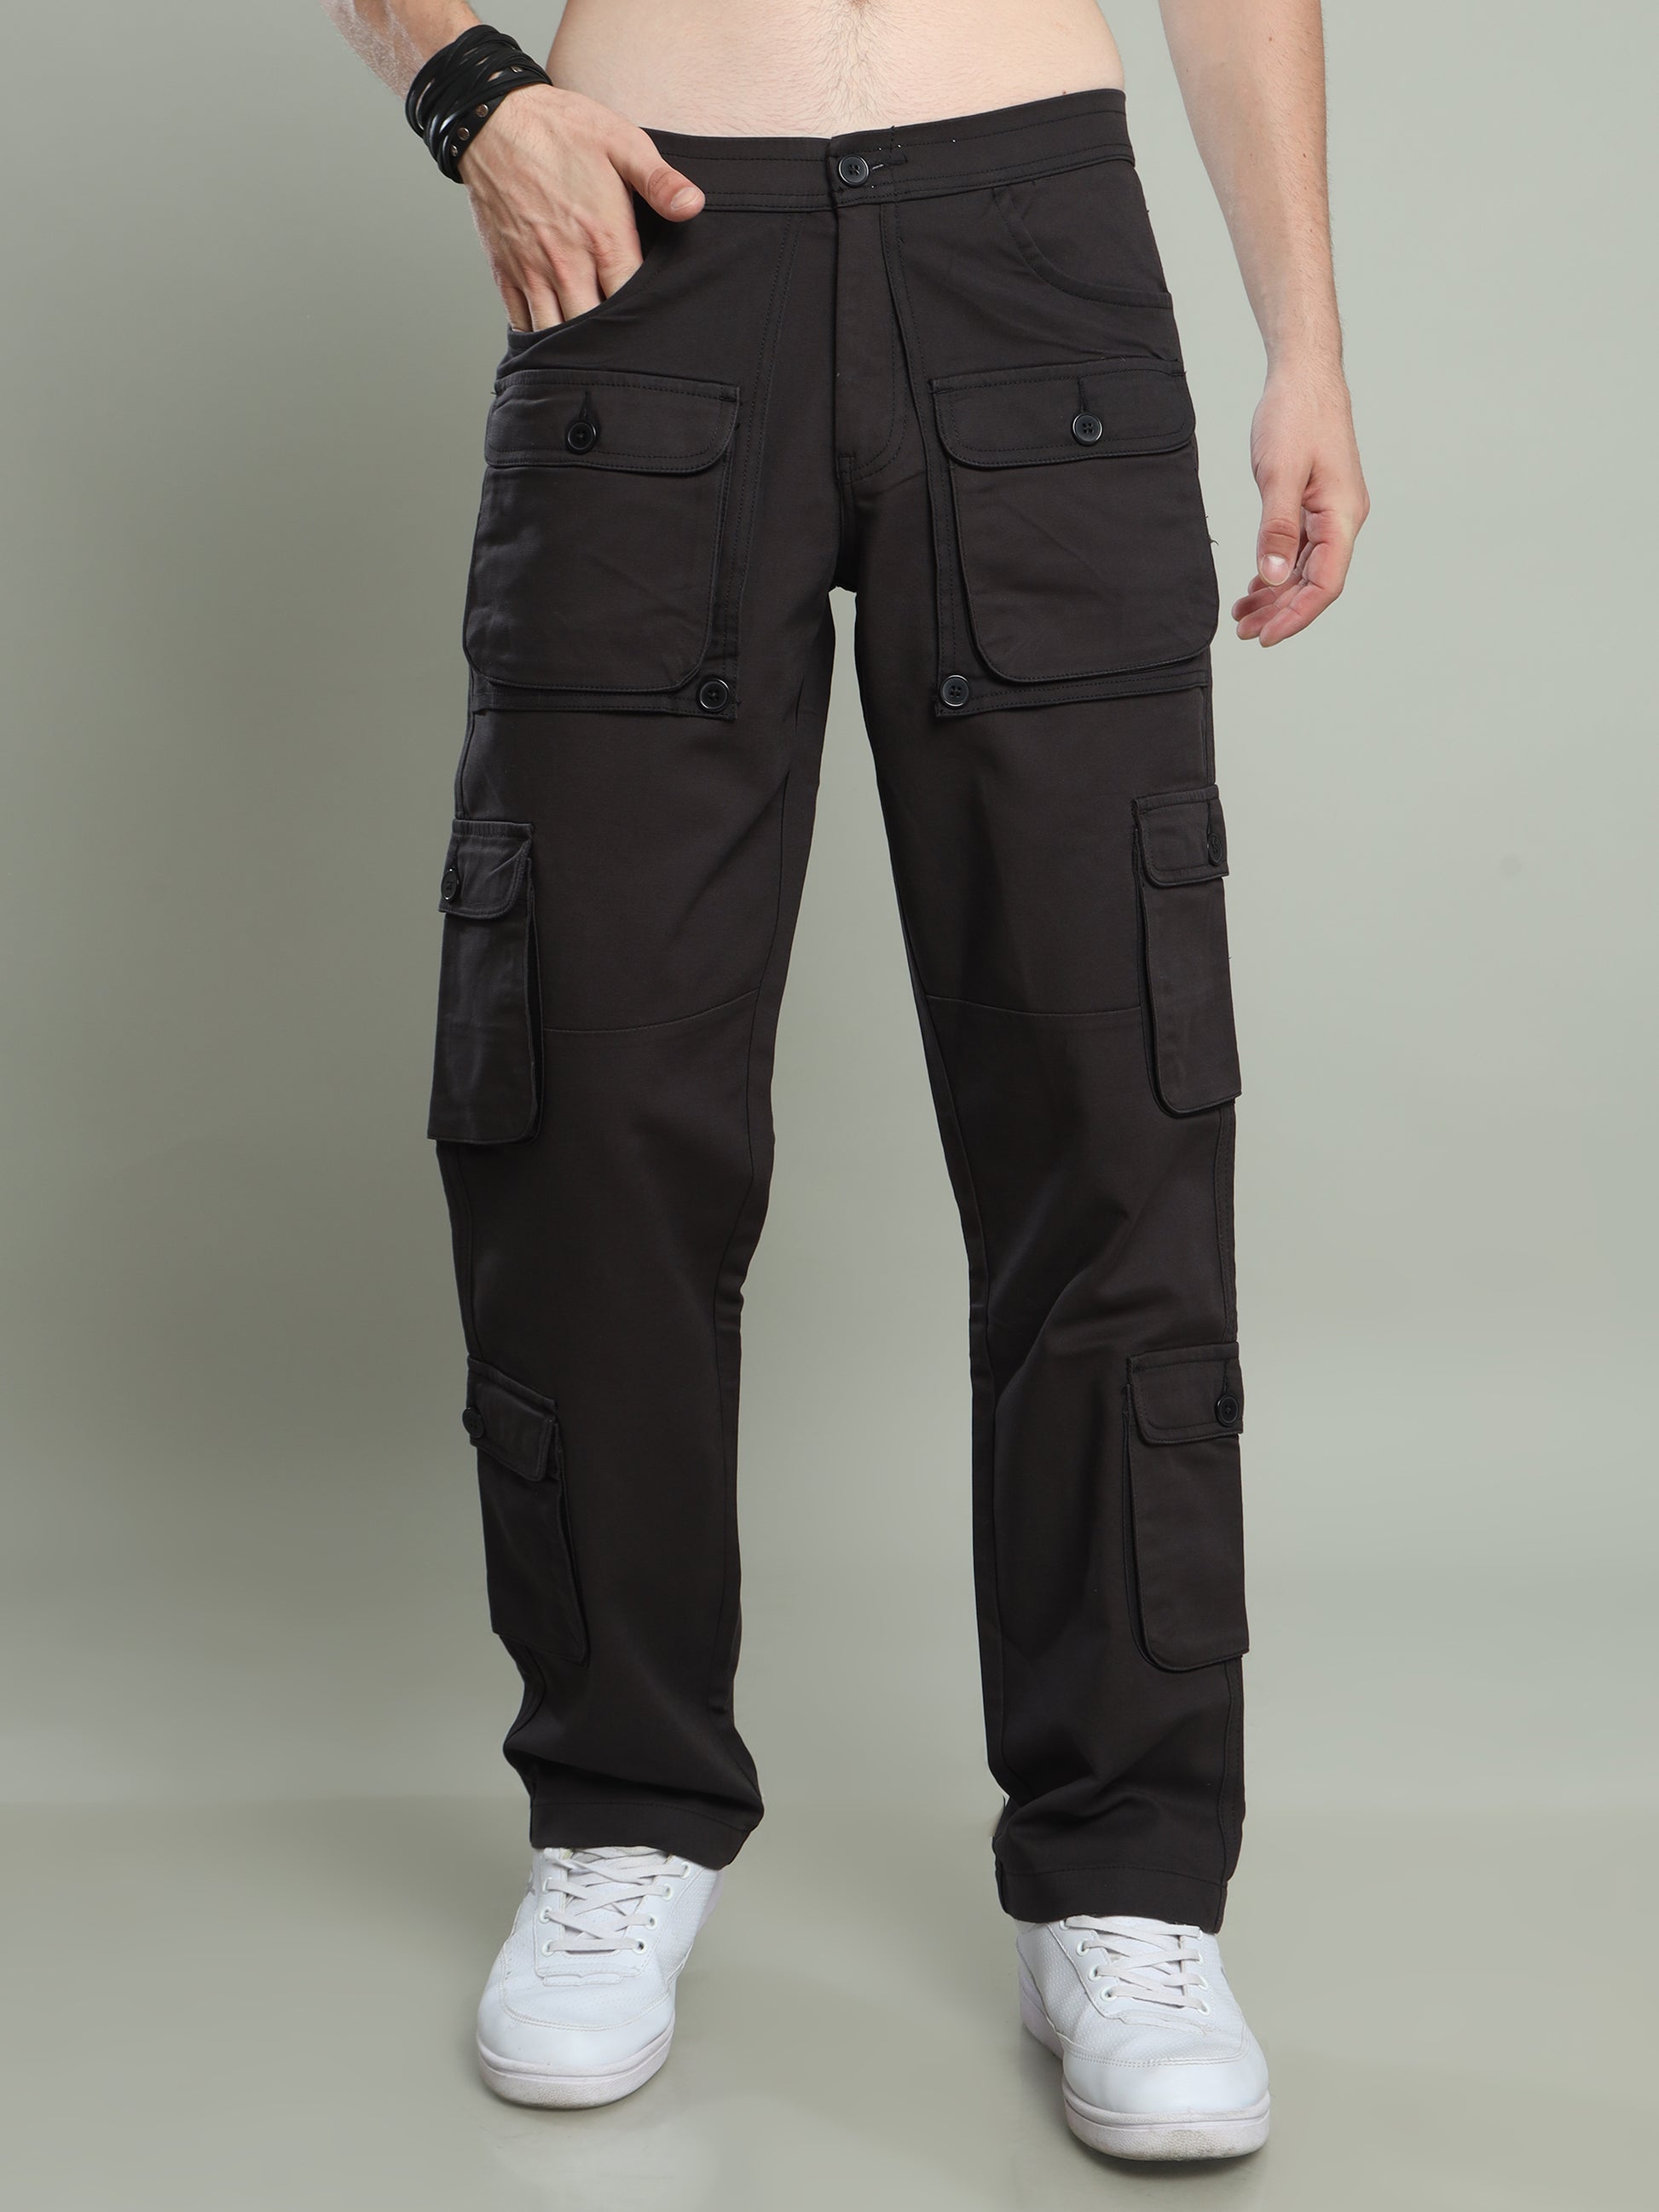 multi pocket baggy trousers flared cargo pants is popular. Shop on